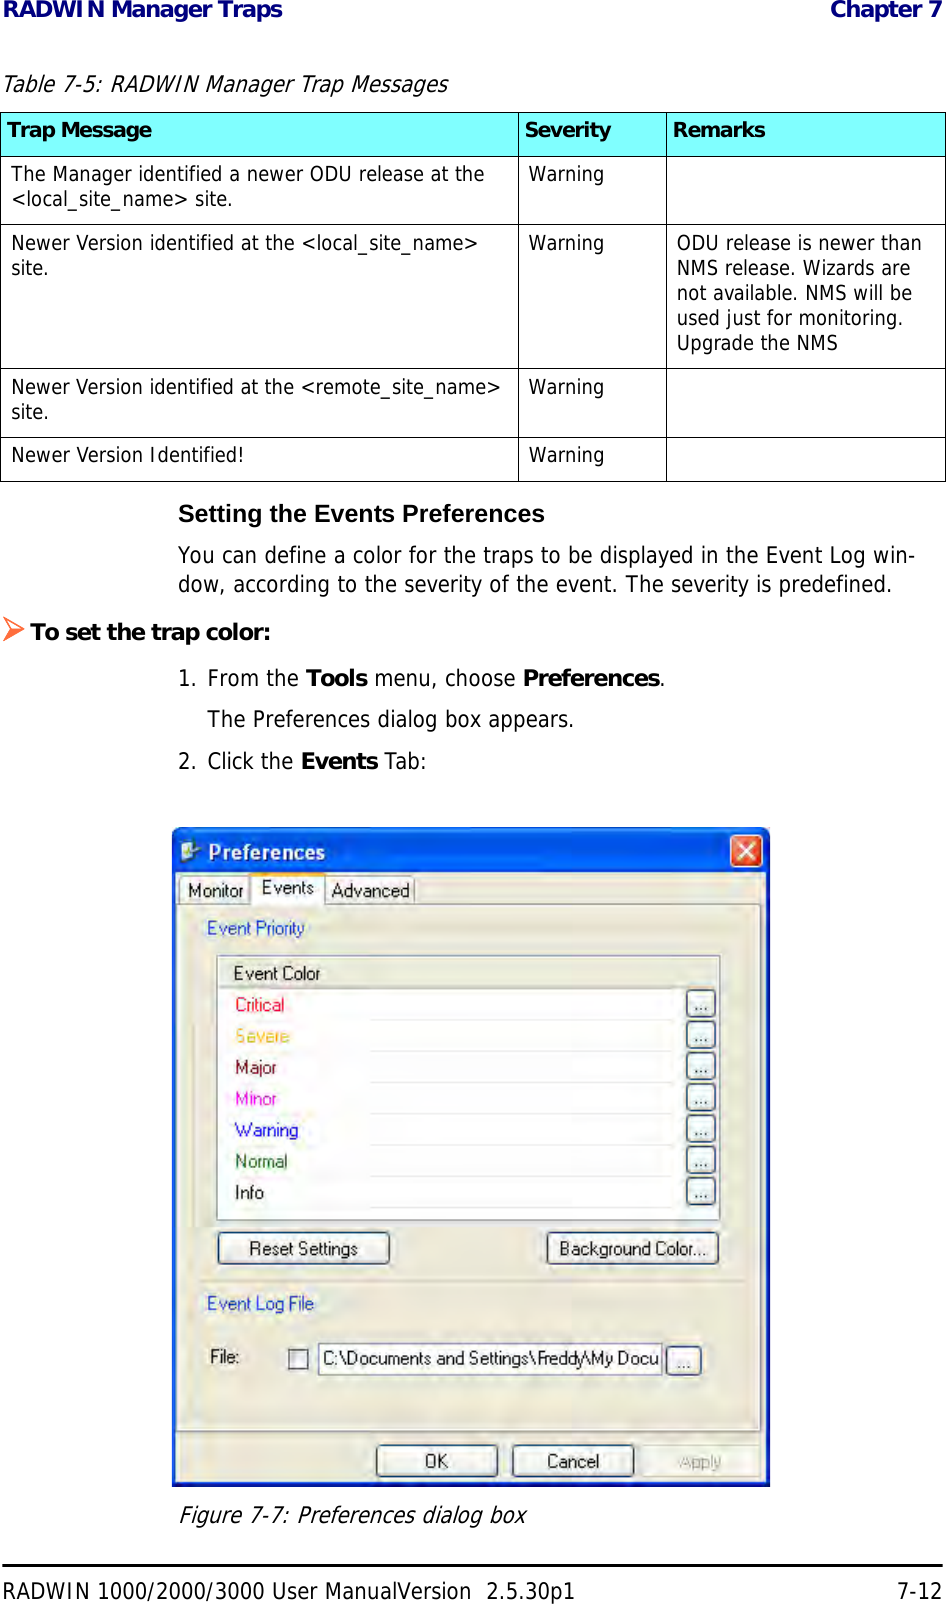 RADWIN Manager Traps  Chapter 7RADWIN 1000/2000/3000 User ManualVersion  2.5.30p1 7-12Setting the Events PreferencesYou can define a color for the traps to be displayed in the Event Log win-dow, according to the severity of the event. The severity is predefined.¾To set the trap color:1. From the Tools menu, choose Preferences.The Preferences dialog box appears.2. Click the Events Tab:Figure 7-7: Preferences dialog boxThe Manager identified a newer ODU release at the &lt;local_site_name&gt; site. WarningNewer Version identified at the &lt;local_site_name&gt; site. Warning ODU release is newer than NMS release. Wizards are not available. NMS will be used just for monitoring. Upgrade the NMSNewer Version identified at the &lt;remote_site_name&gt; site. WarningNewer Version Identified! WarningTable 7-5: RADWIN Manager Trap MessagesTrap Message Severity Remarks